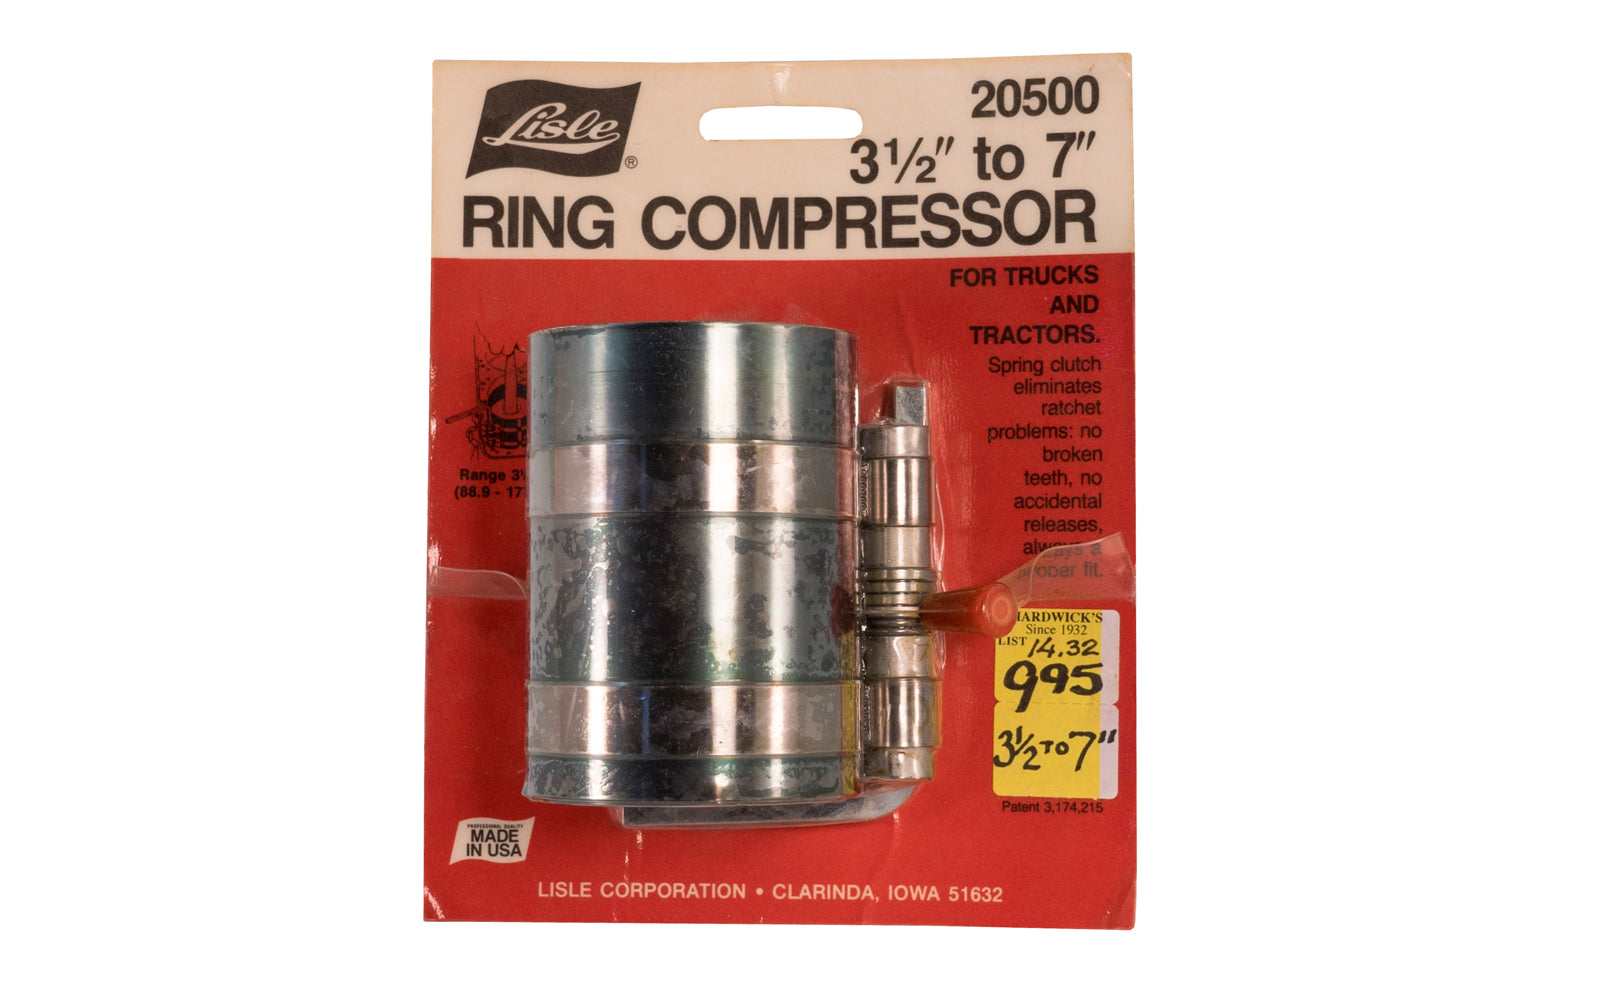 Lisle 3-1/2" to 7" Ring Compressor. For tricks & tractors. Spring clutch eliminates ratchet problems: No broken teeth, no accidental releases.